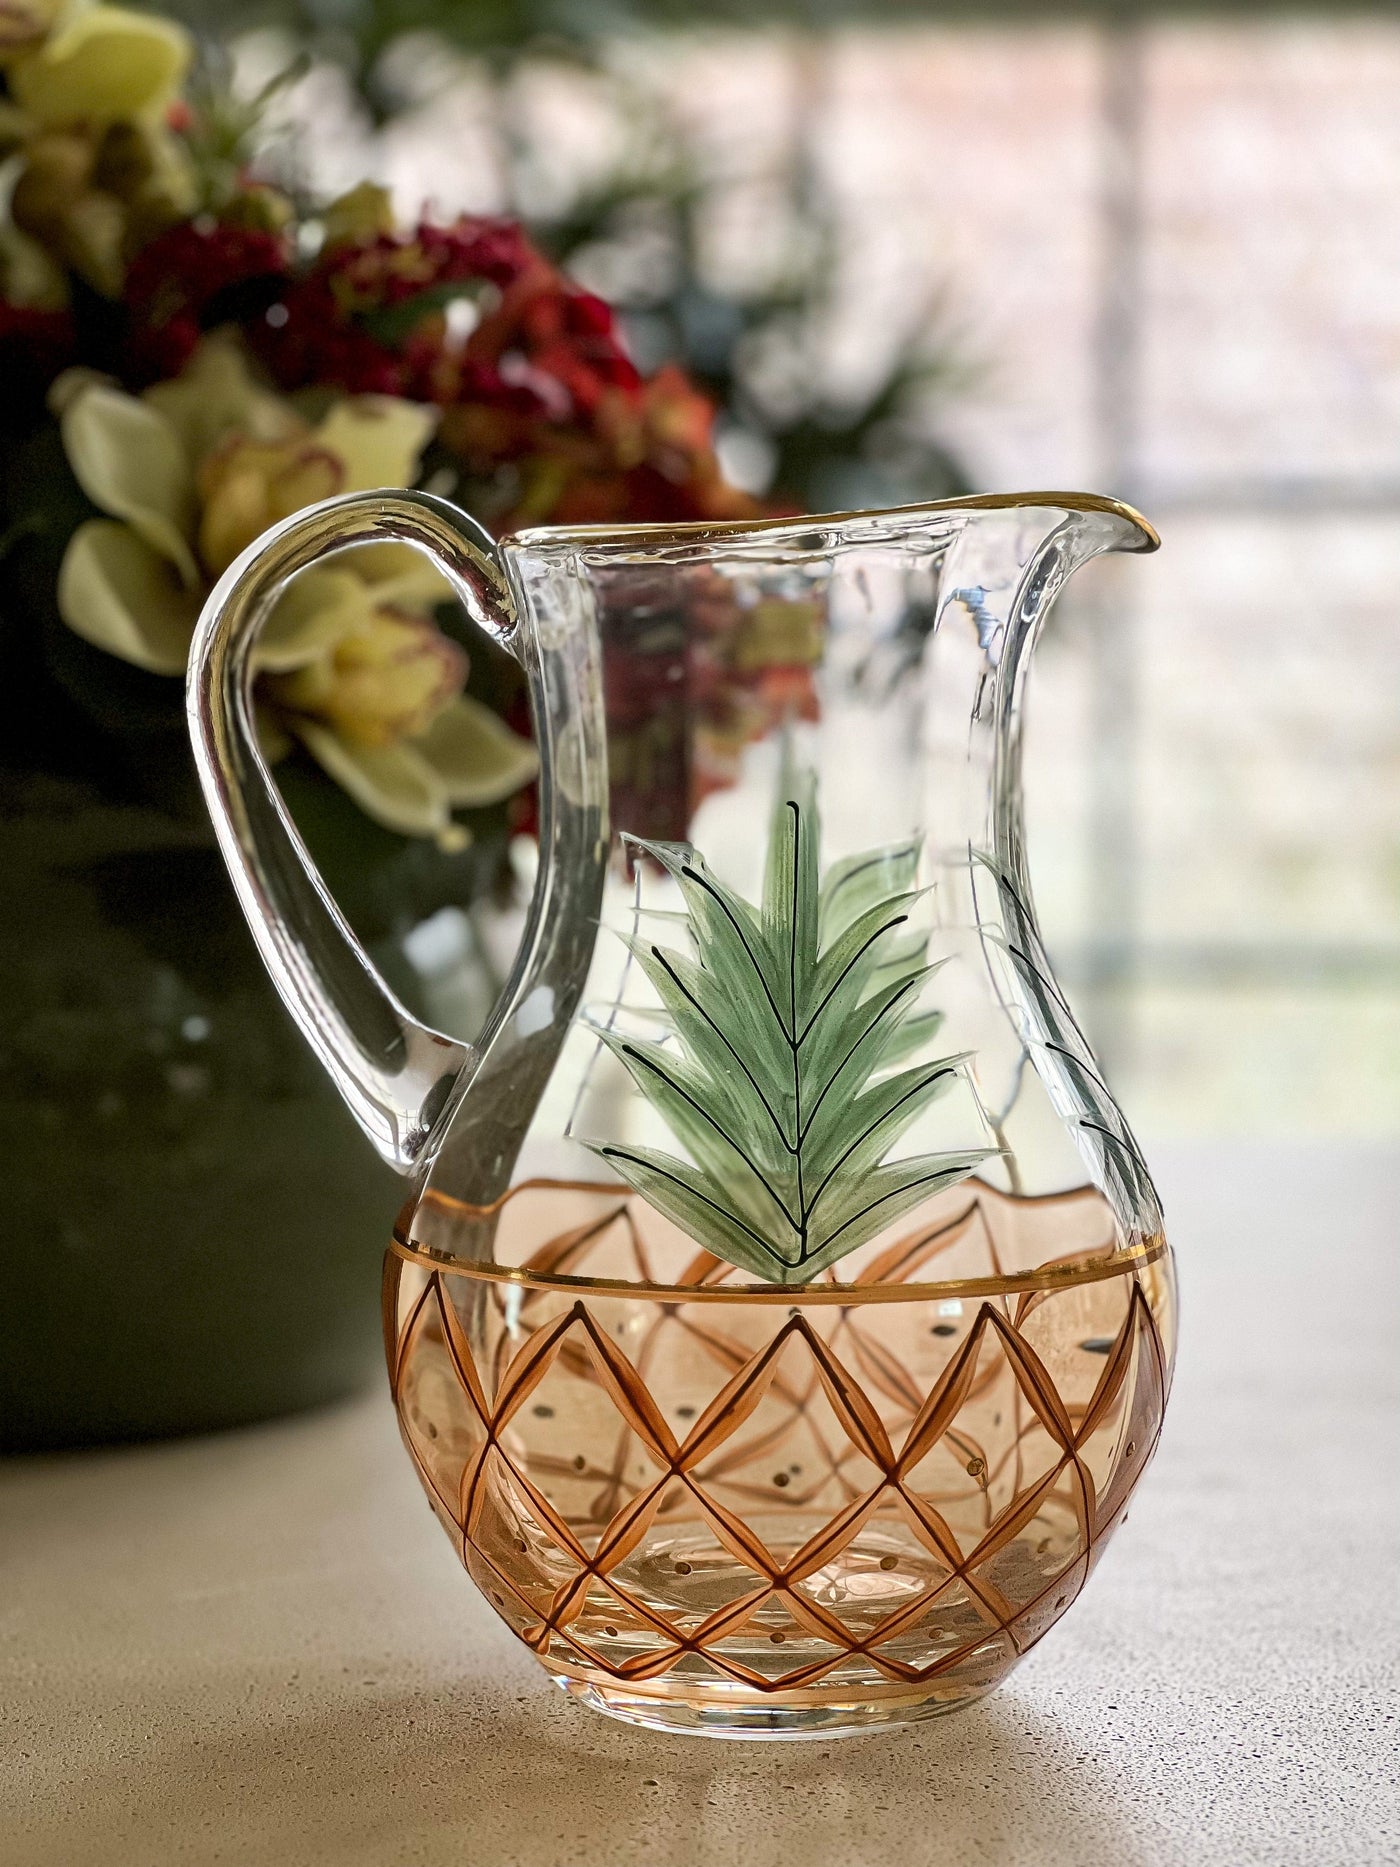 Hand-Painted Romanian Mouth Blown Optic Glass Pineapple Pitcher with 22K Gold Accents (1970's) Revive In Style Vintage Furniture Painted Refinished Redesign Beautiful One of a Kind Artistic Antique Unique Home Decor Interior Design French Country Shabby Chic Cottage Farmhouse Grandmillenial Coastal Chalk Paint Metallic Glam Eclectic Quality Dovetailed Rustic Furniture Painter Pinterest Bedroom Living Room Entryway Kitchen Home Trends House Styles Decorating ideas